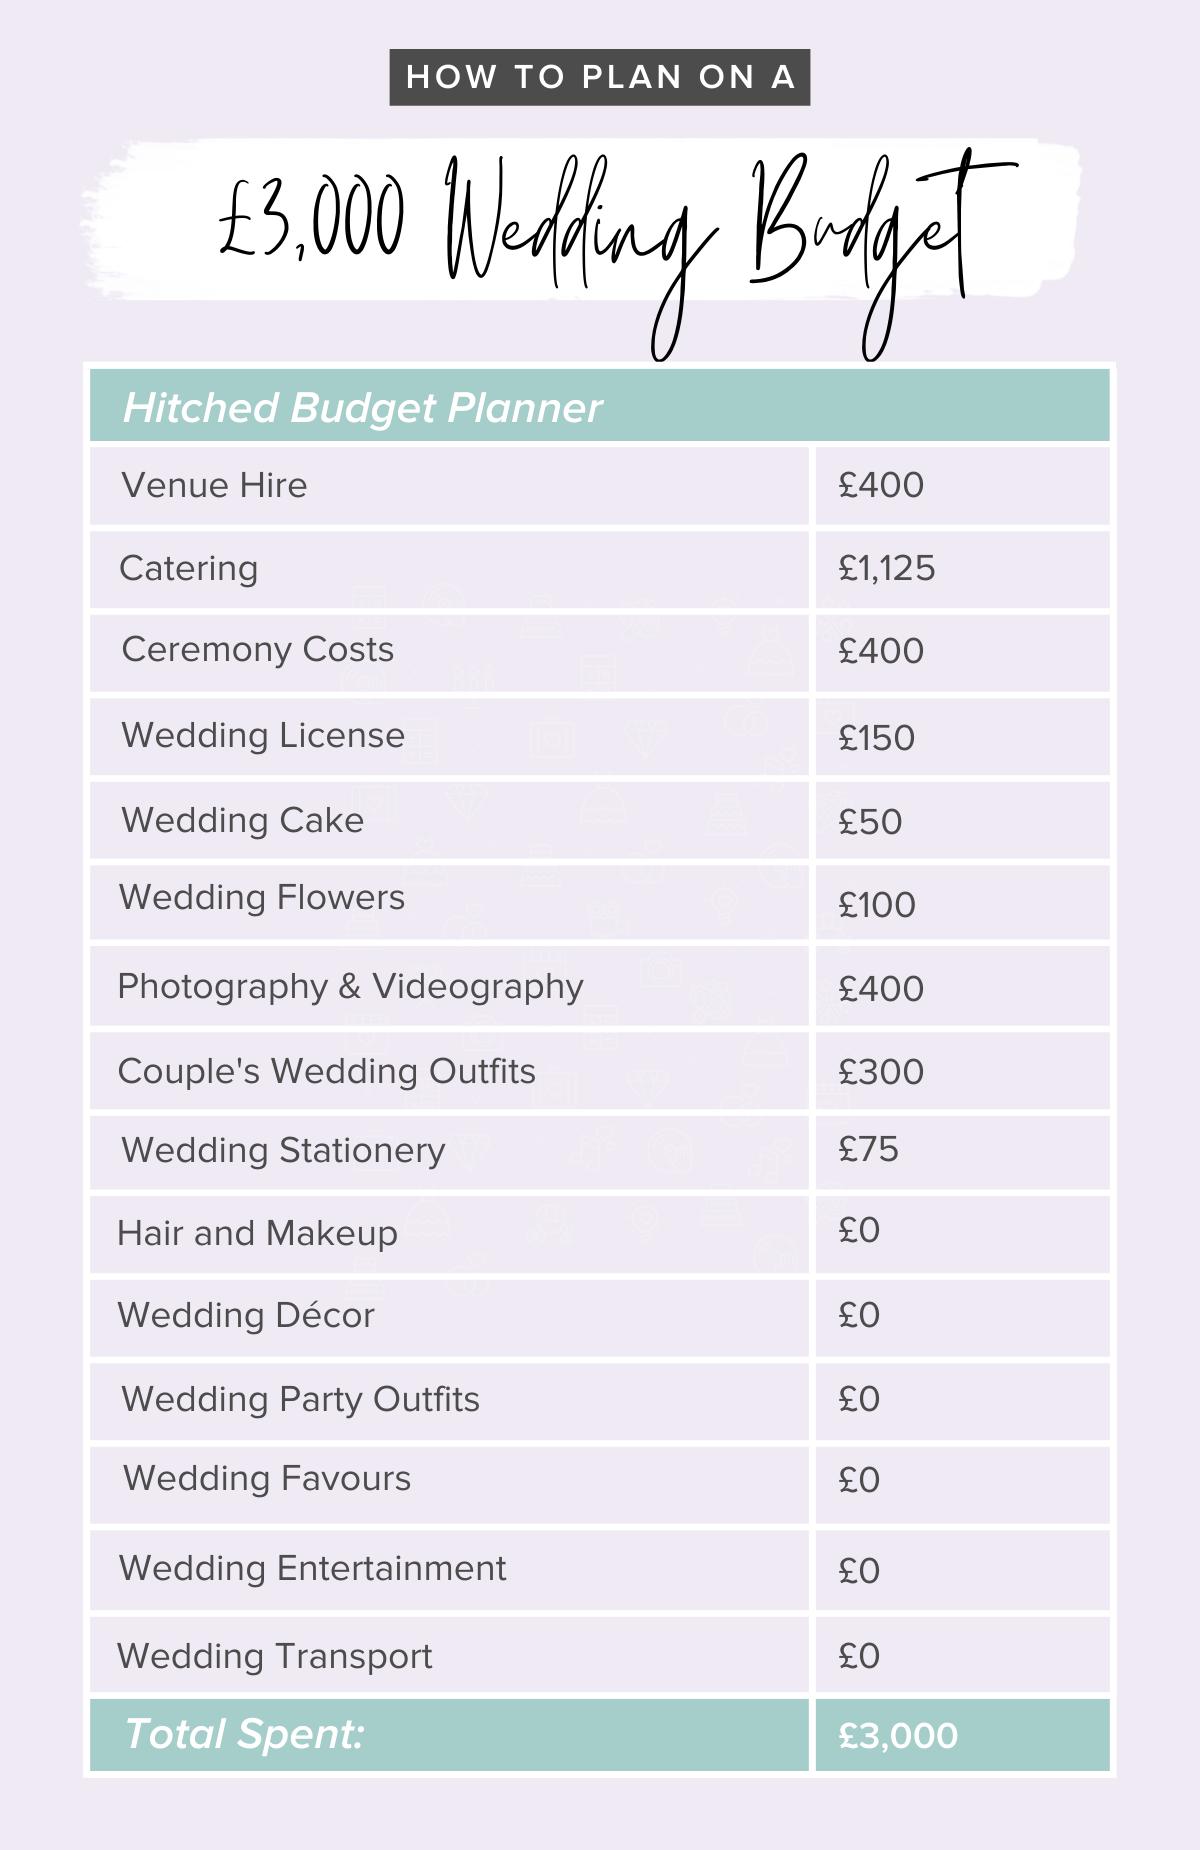 Budget Wedding Guide: How to Plan a Wedding for Just £3,000 - hitched.co.uk - hitched.co.uk